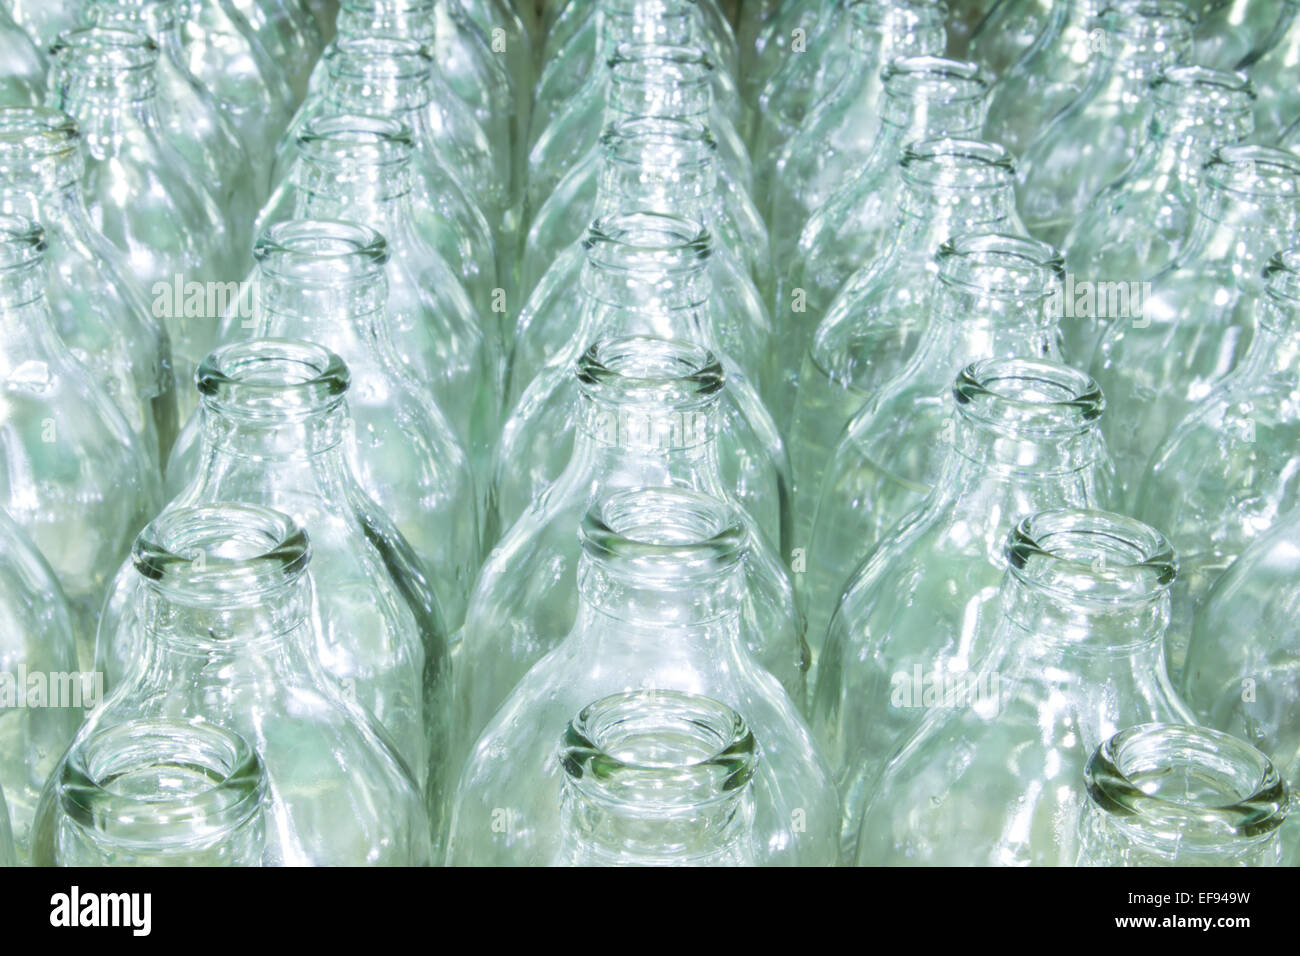 Clear glass bottle filled with water placed at different vertical opening. Stock Photo